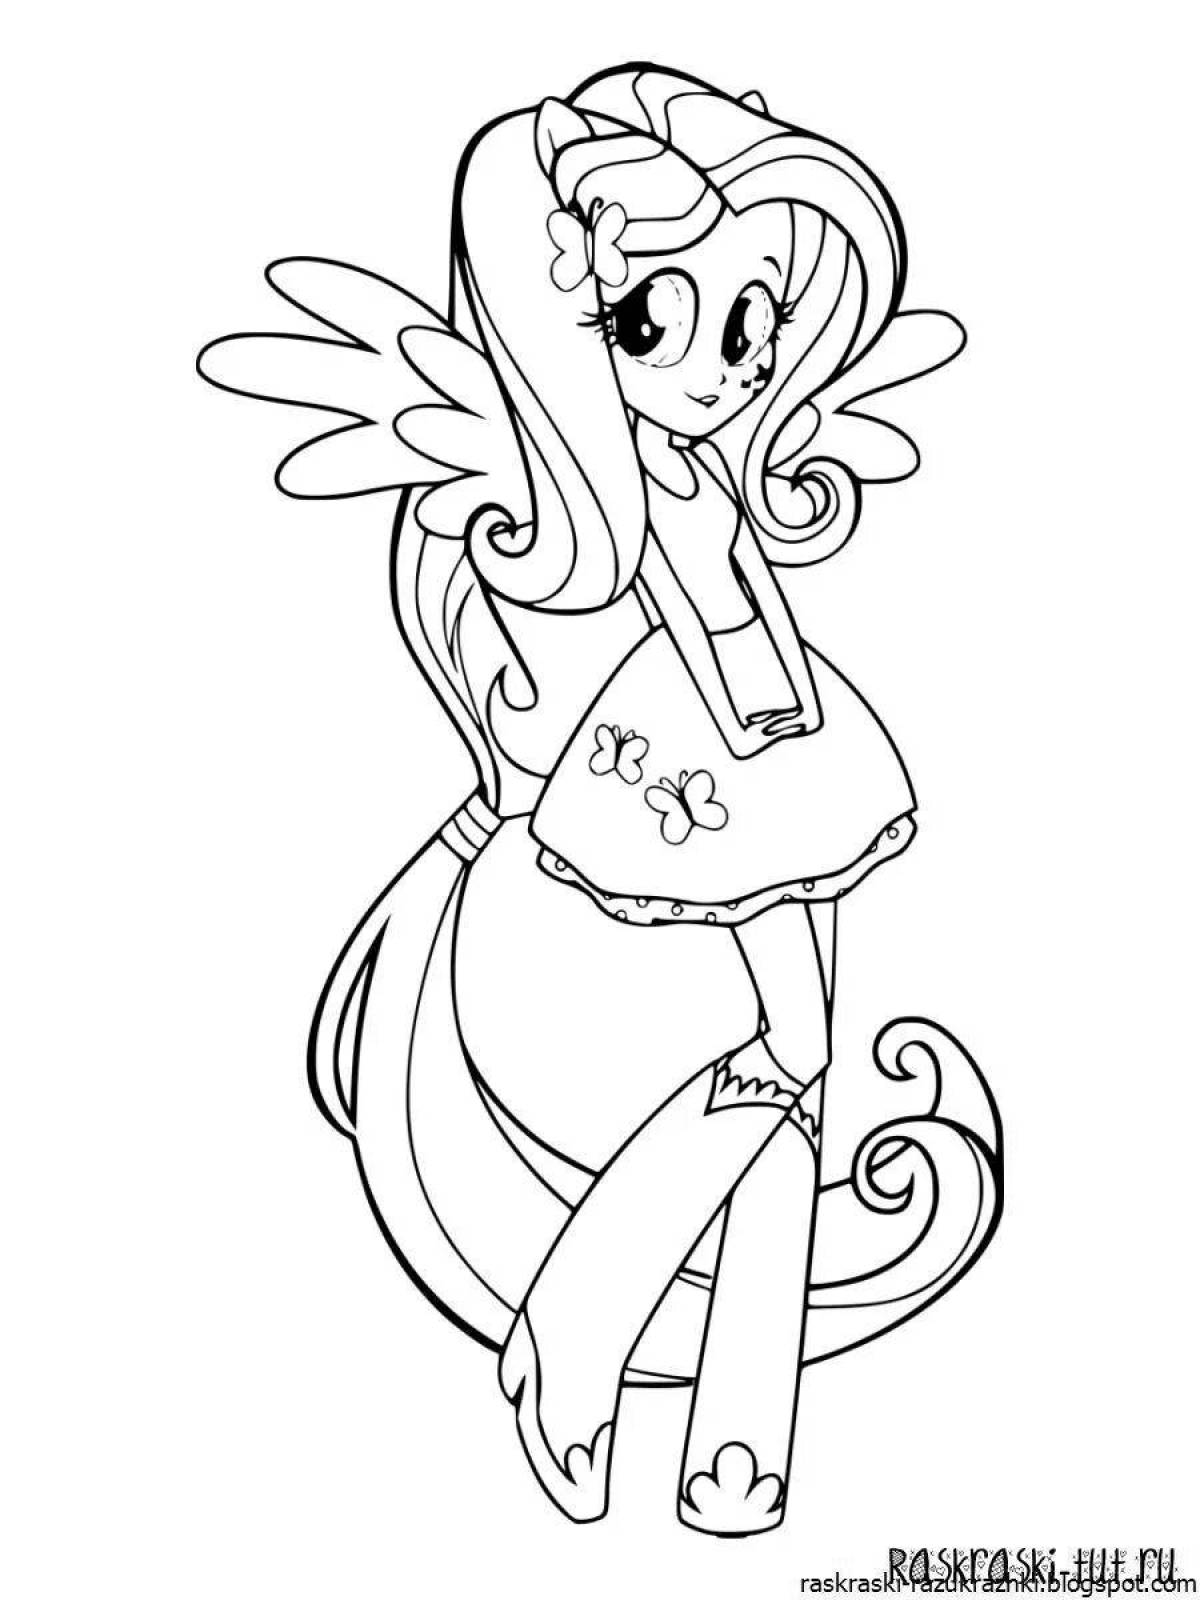 Sparkly little pony girls coloring pages